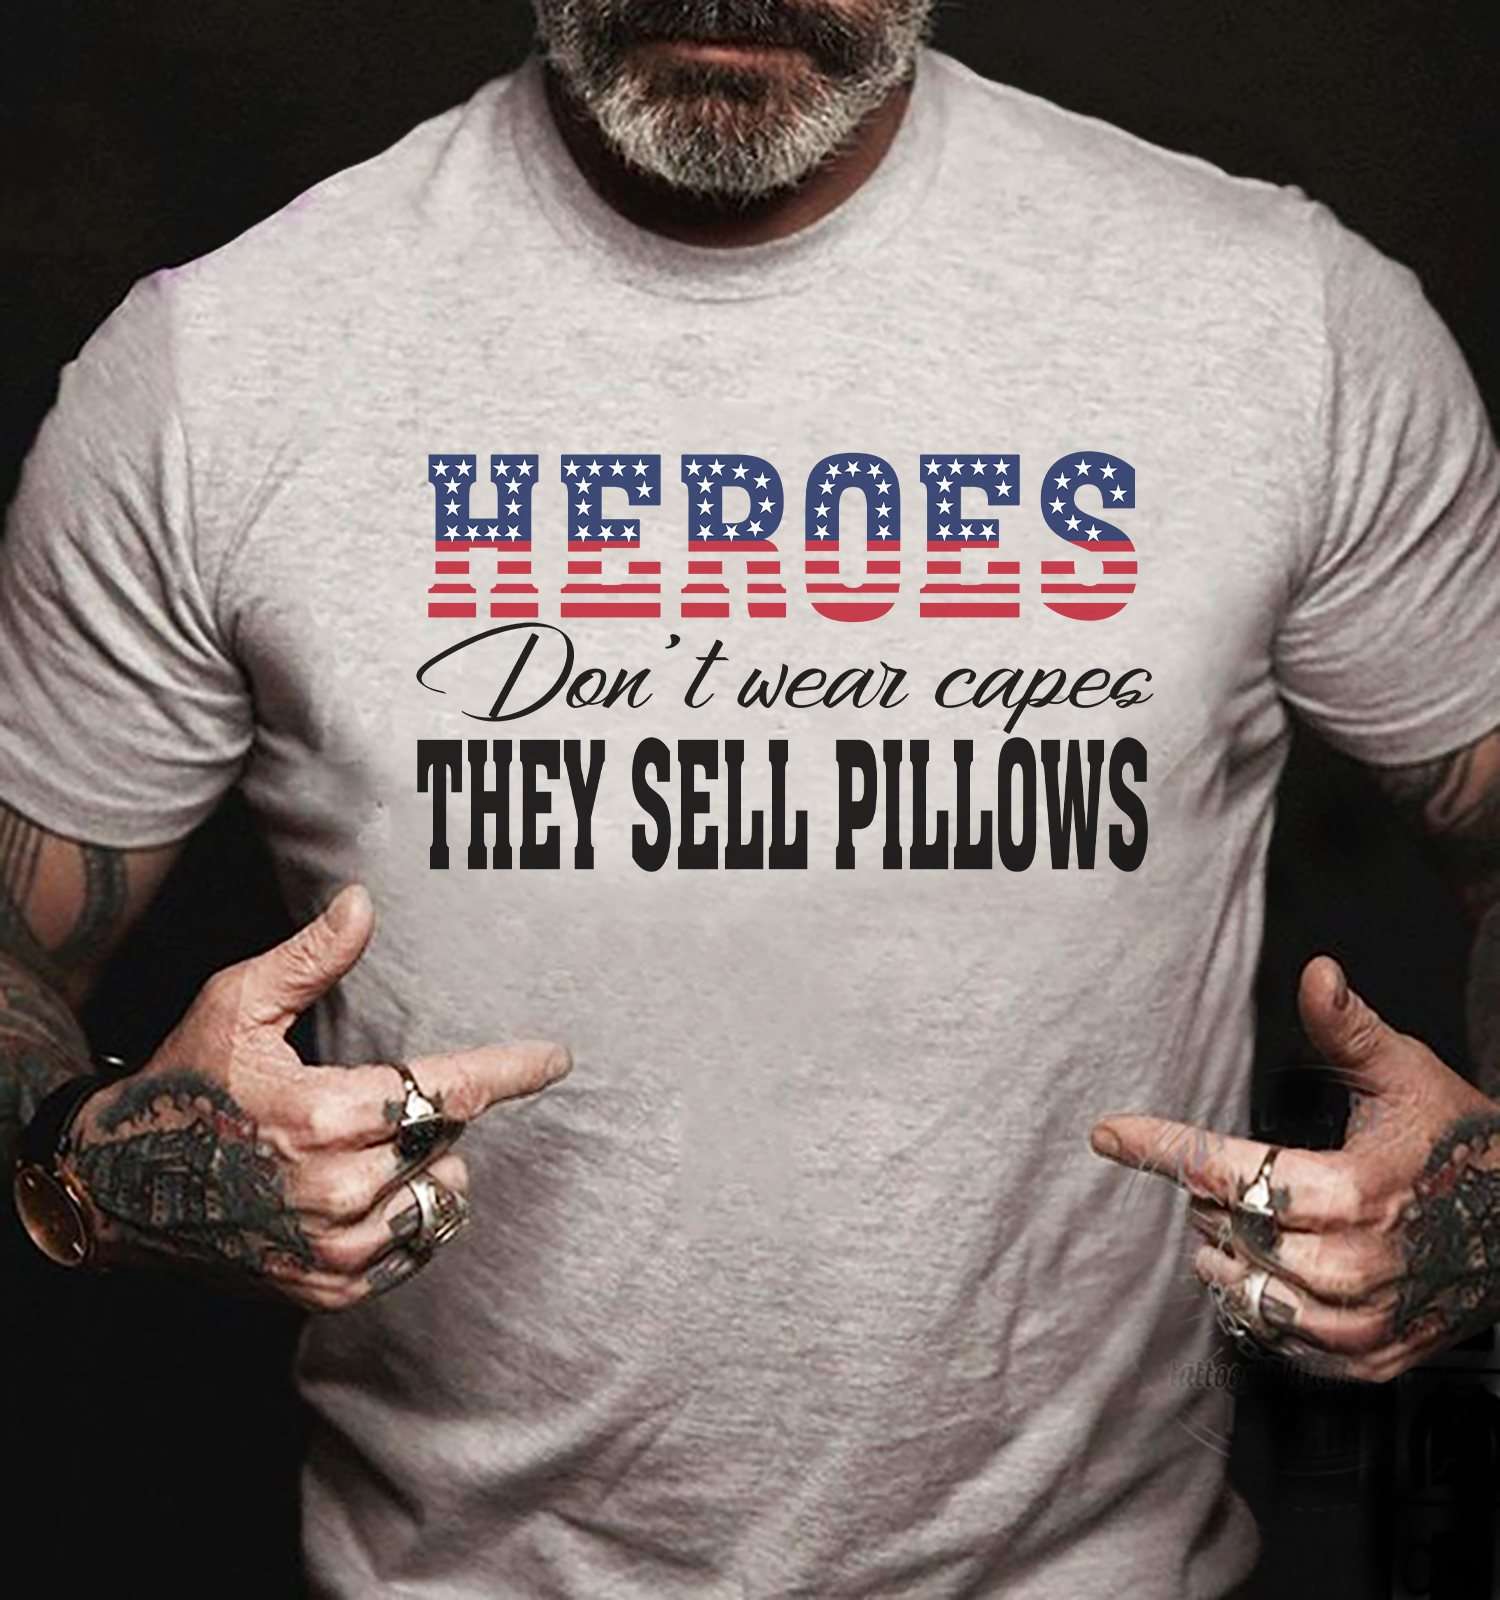 Heroes don't wear capes, they sell pillows - American heroes